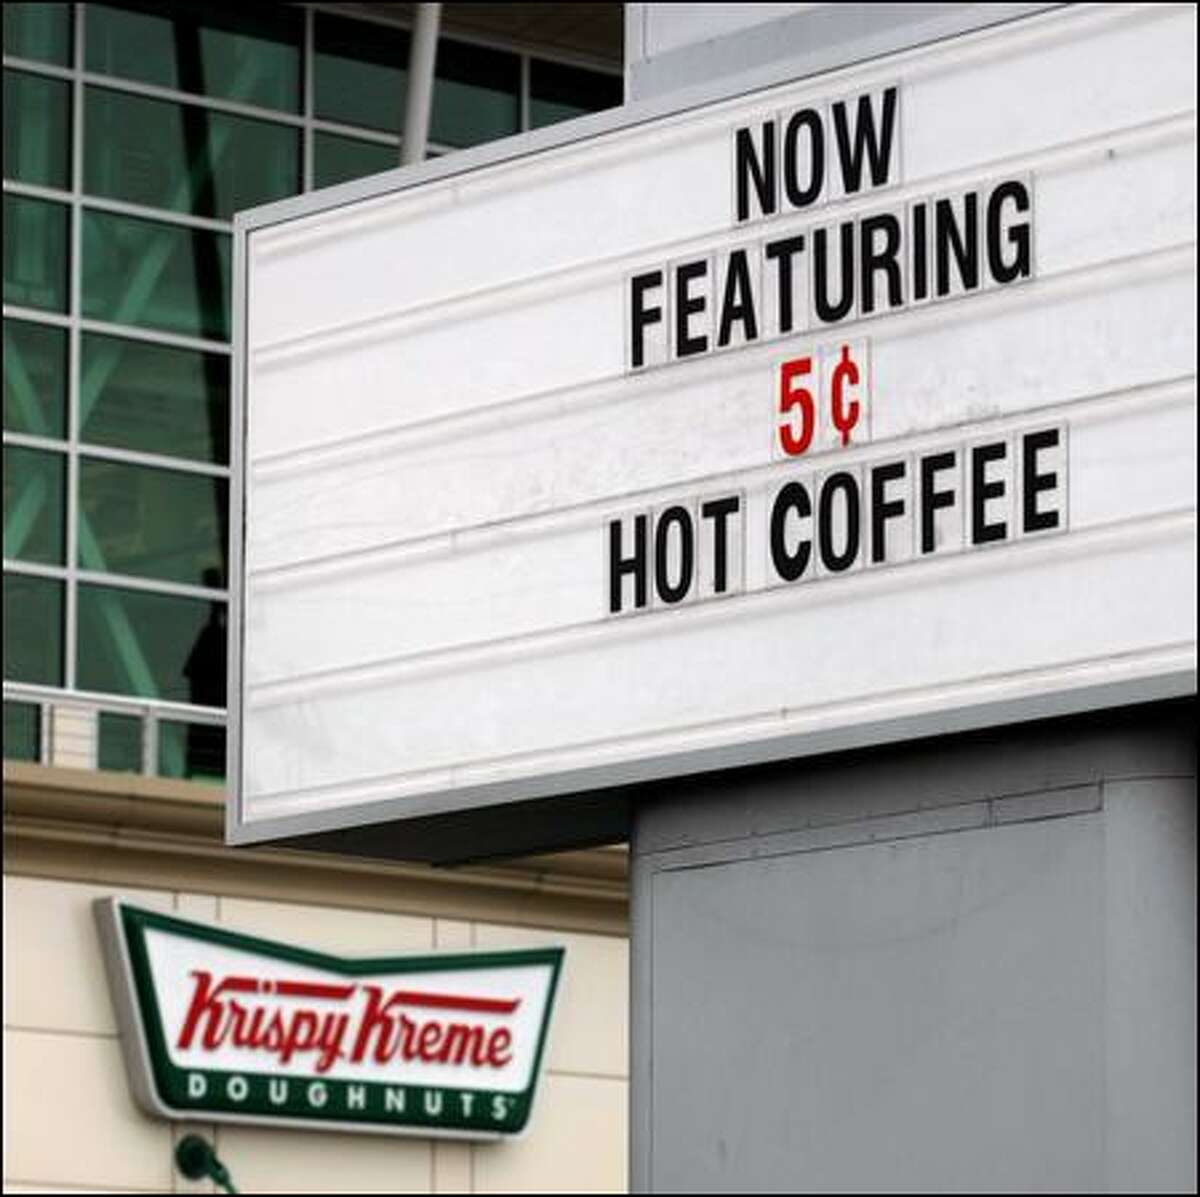 The popular doughnut chain advertises its 12-ounce coffee for 5 cents as part of its New Deal promotion.